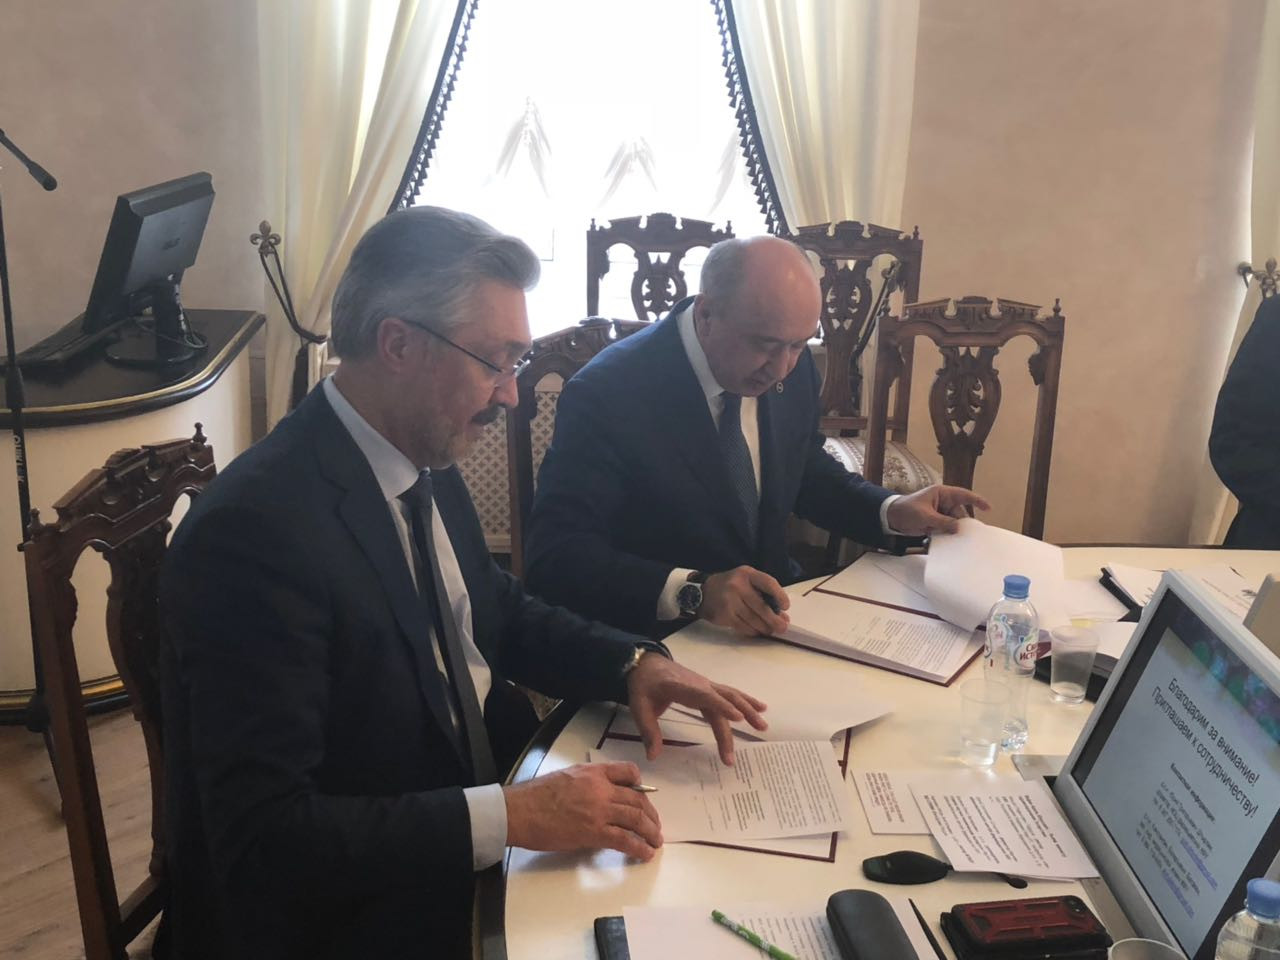 Cooperation Agreement Signed with Saint-Petersburg Research Institute of Phthisiopulmonology ,Saint-Petersburg State Institute of Phthisiopulmonology, Pharmaceutics Center, IC, University Clinic, tuberculosis, medications